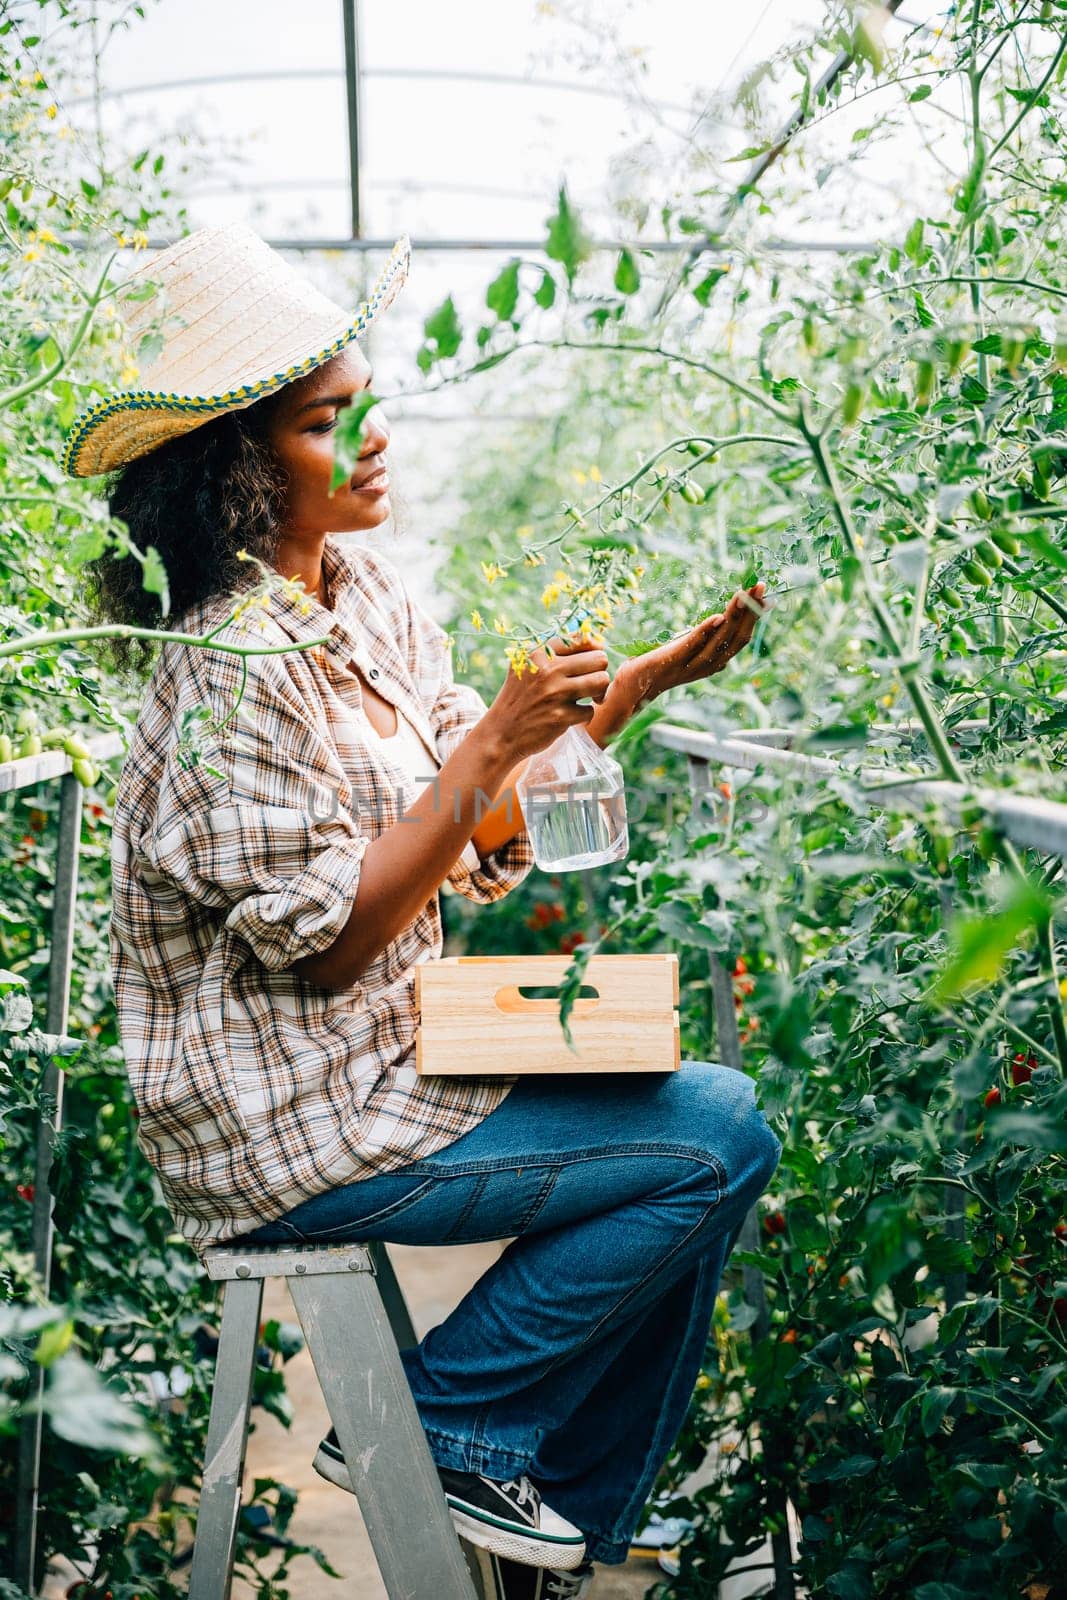 A black woman farmer sprays water on tomato plants in a greenhouse using a bottle. Employing technology for plant care and fostering growth in vegetable farming.